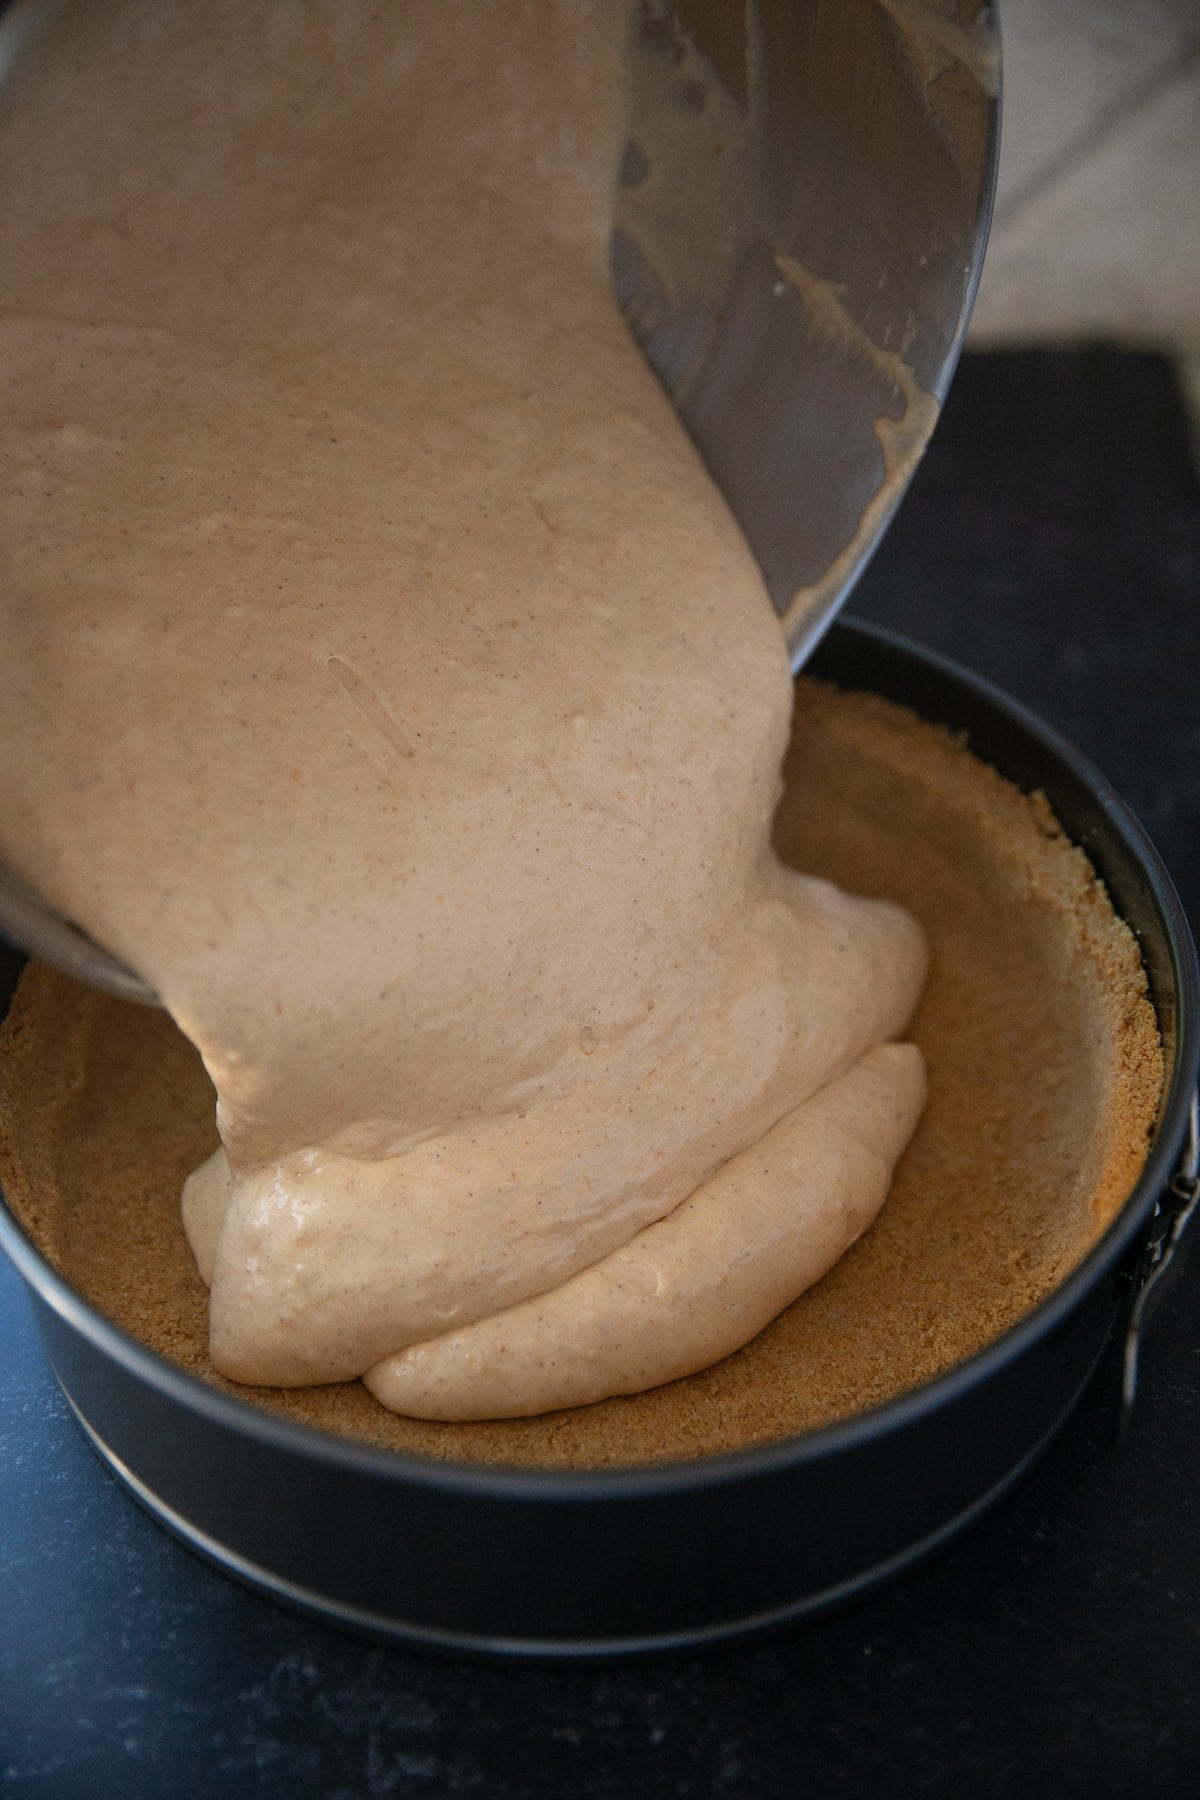 pouring pumpkin cheesecake batter into the baked graham cracker crust